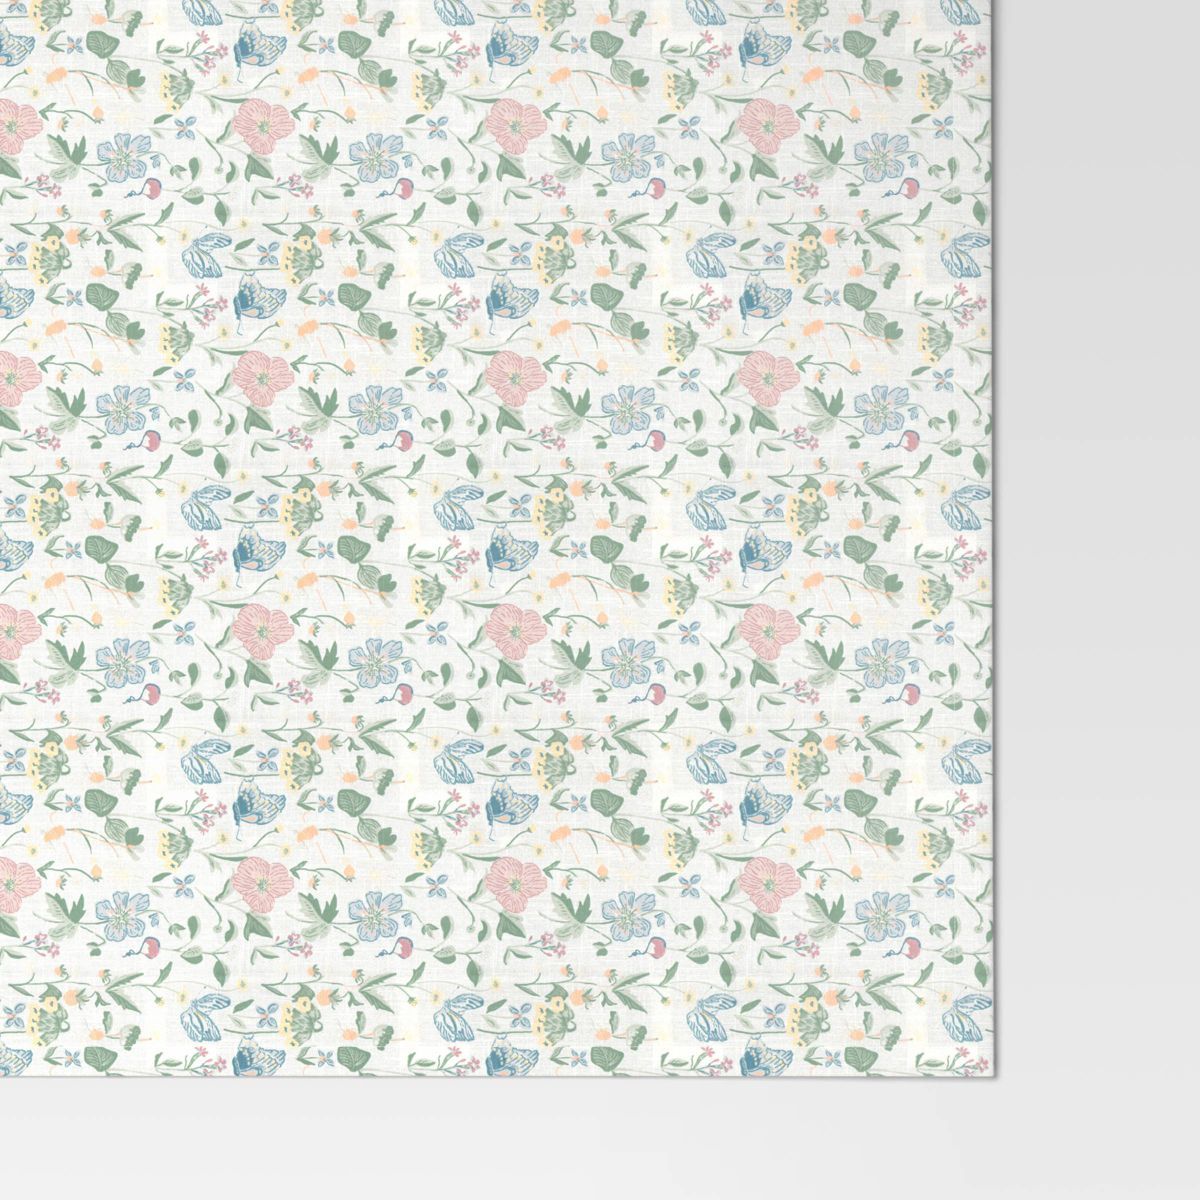 84"x60" Floral Tablecloth - Threshold™ | Target